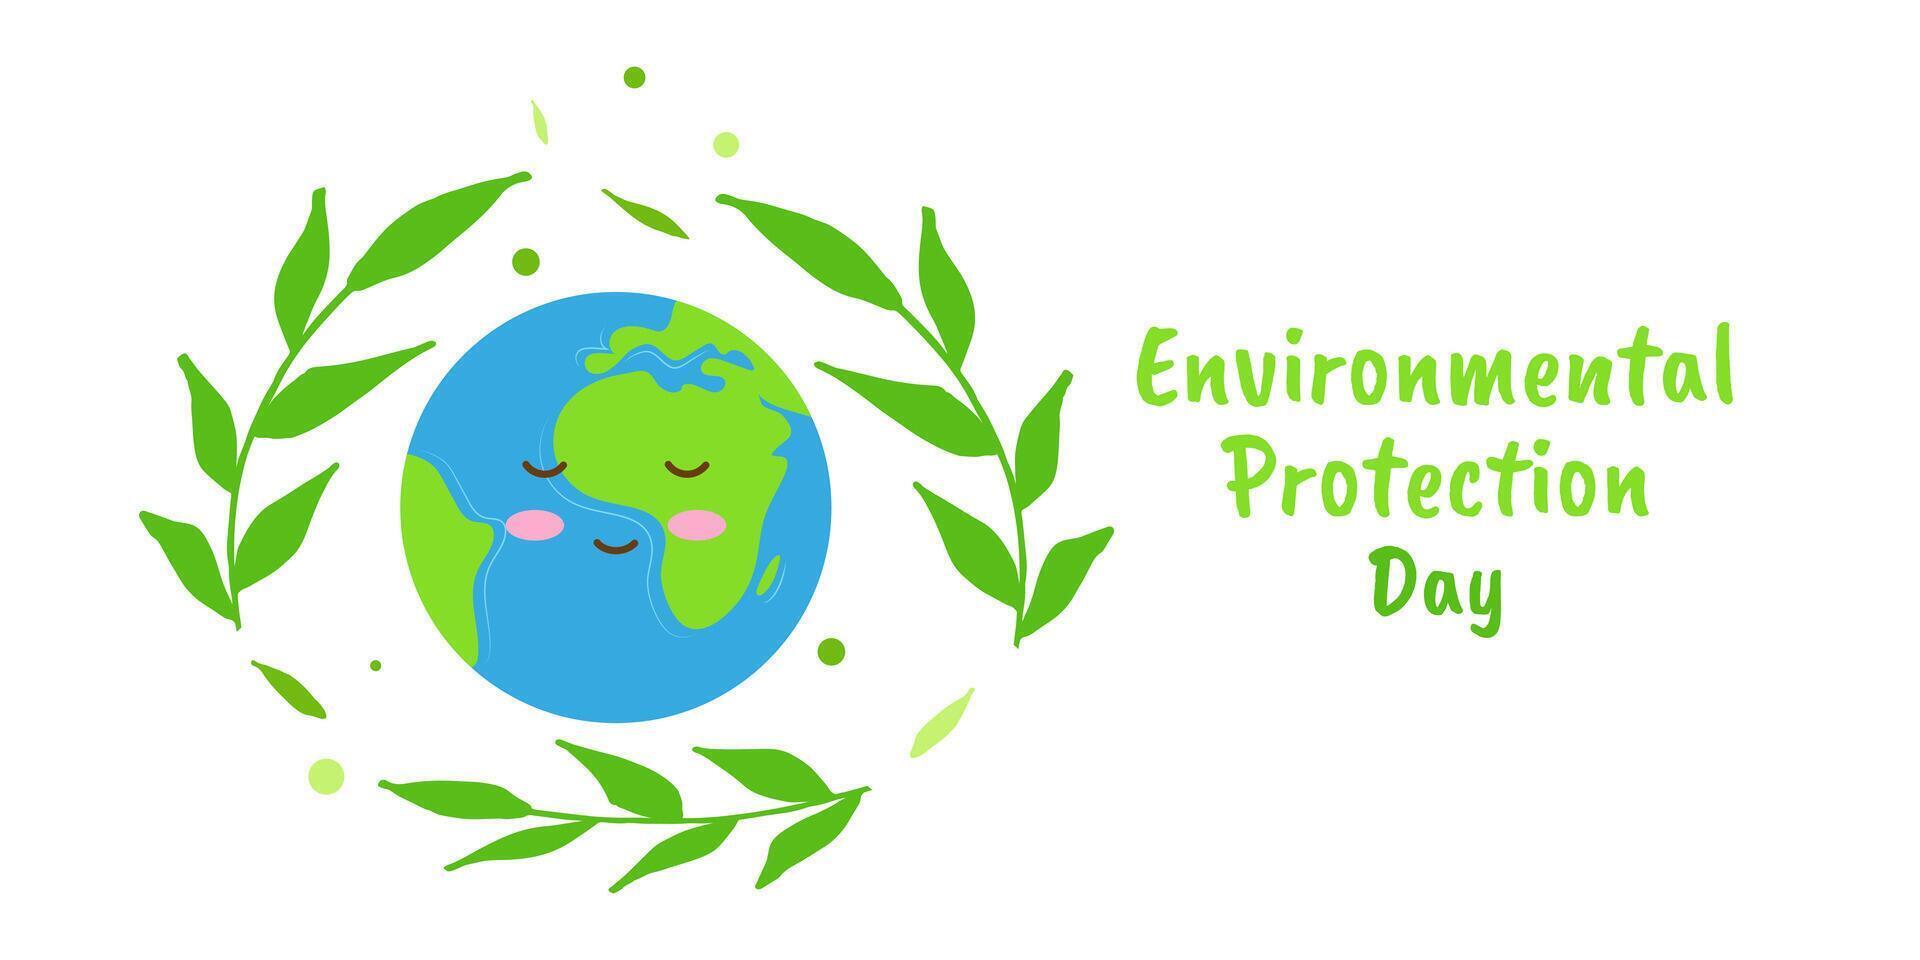 Environmental Protection Day Save the Planet Earth vector